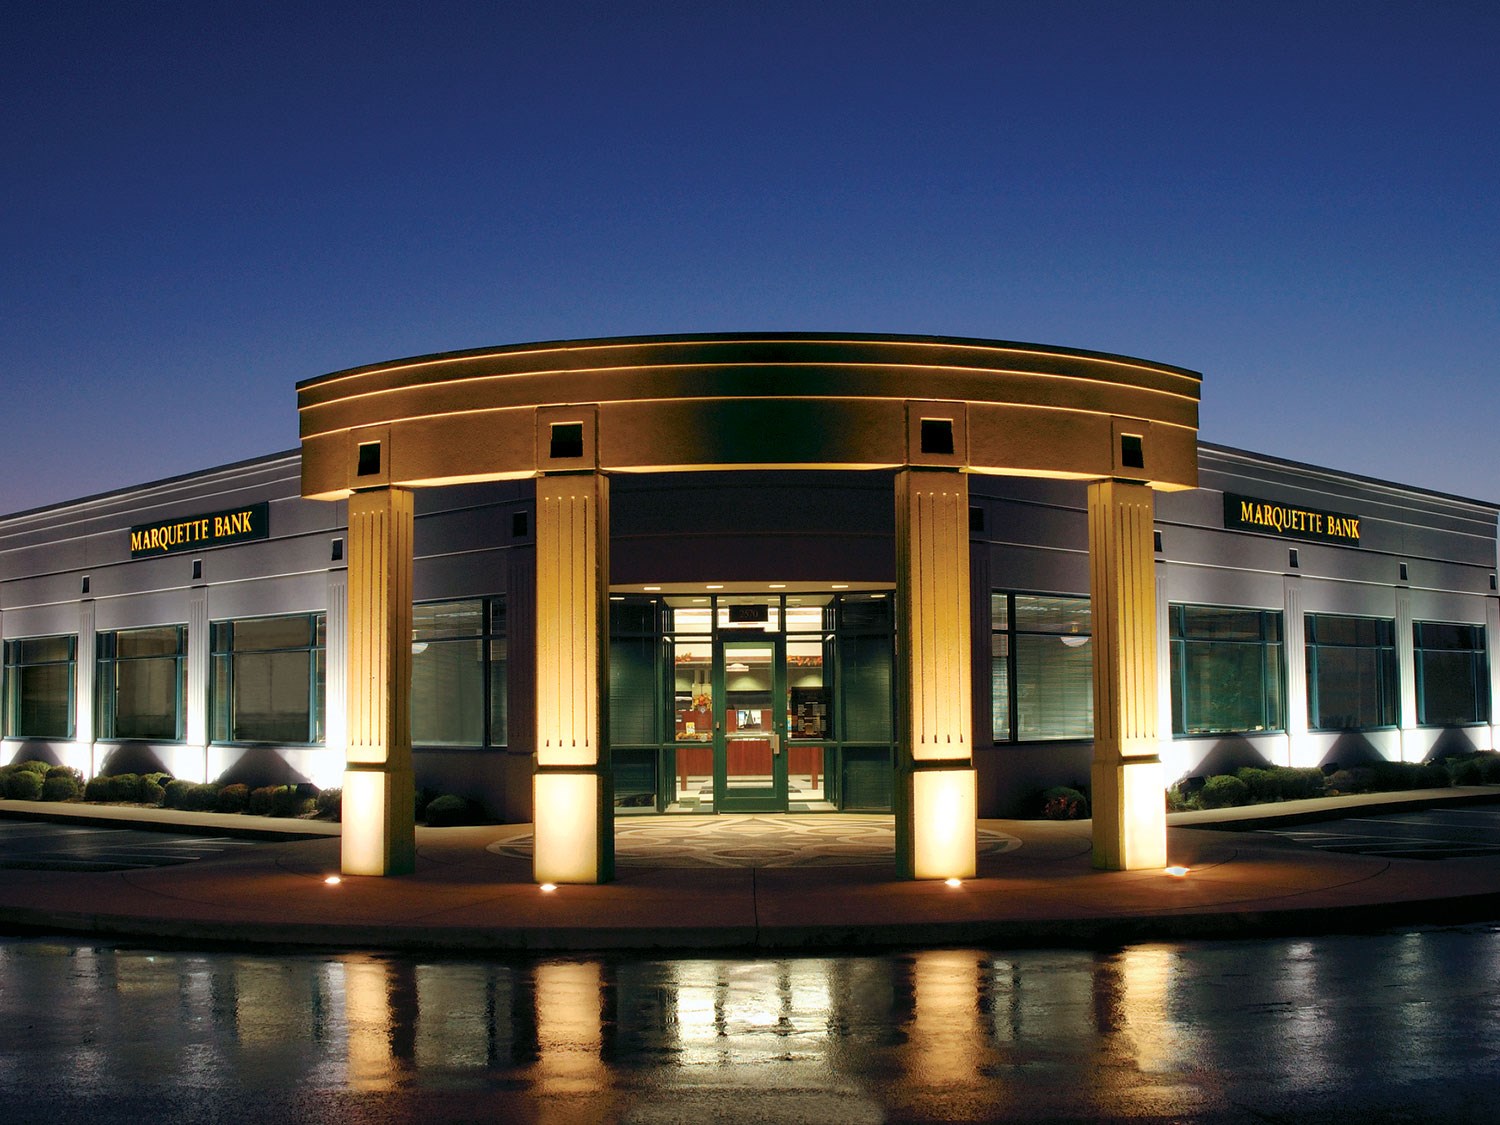 Marquette Bank Branch Image - image of branch with dark background